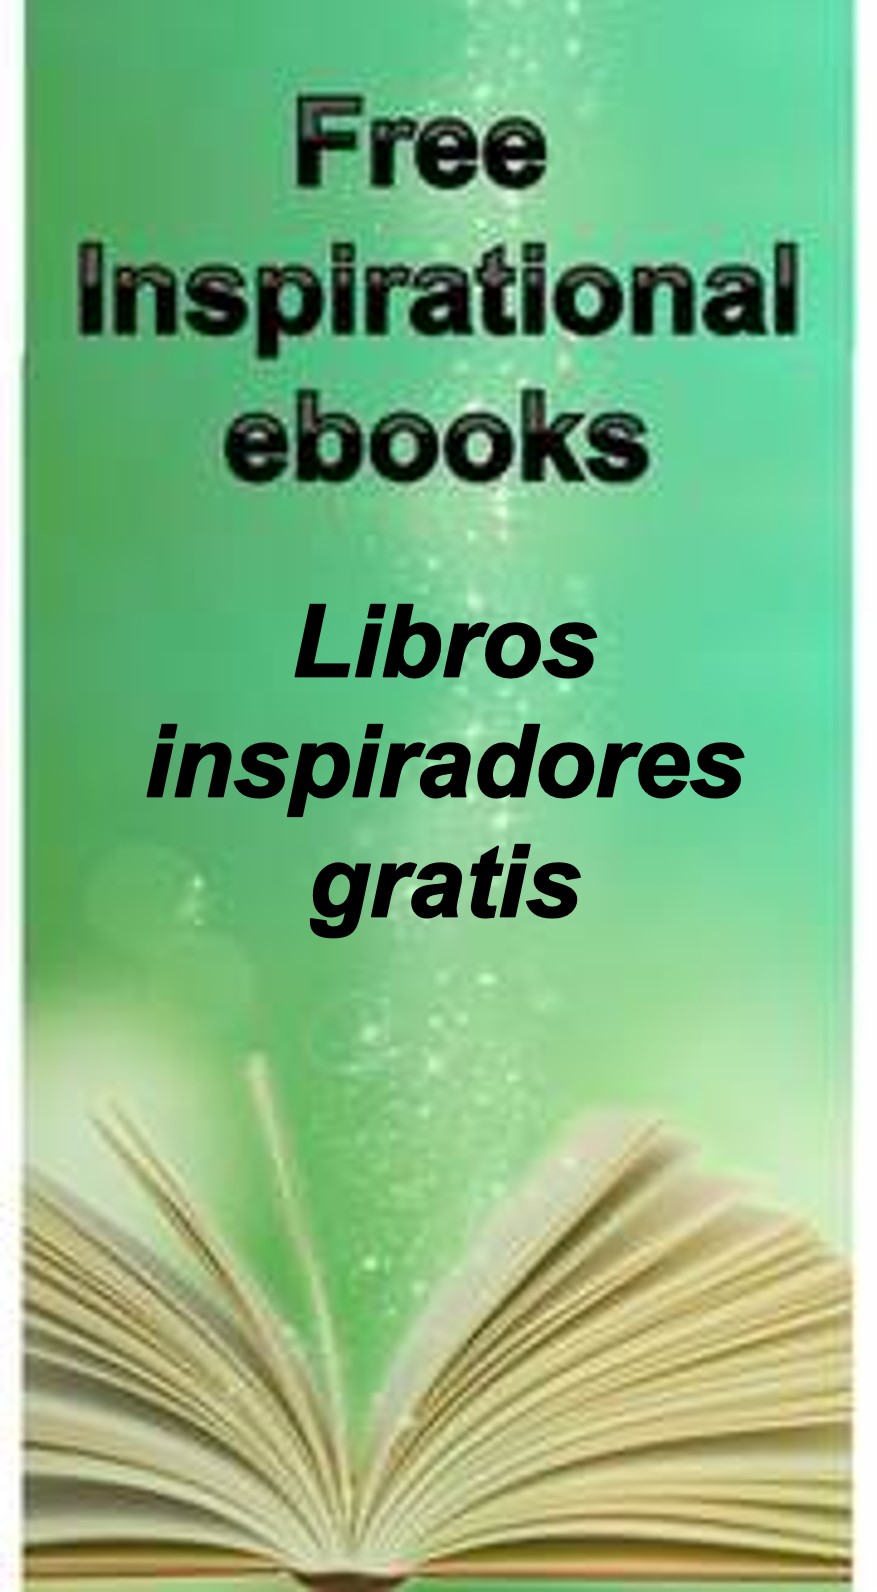 free ebooks, ebooks and magazines for youth and adults - libros y ebooks gratis para jovenes y adultos